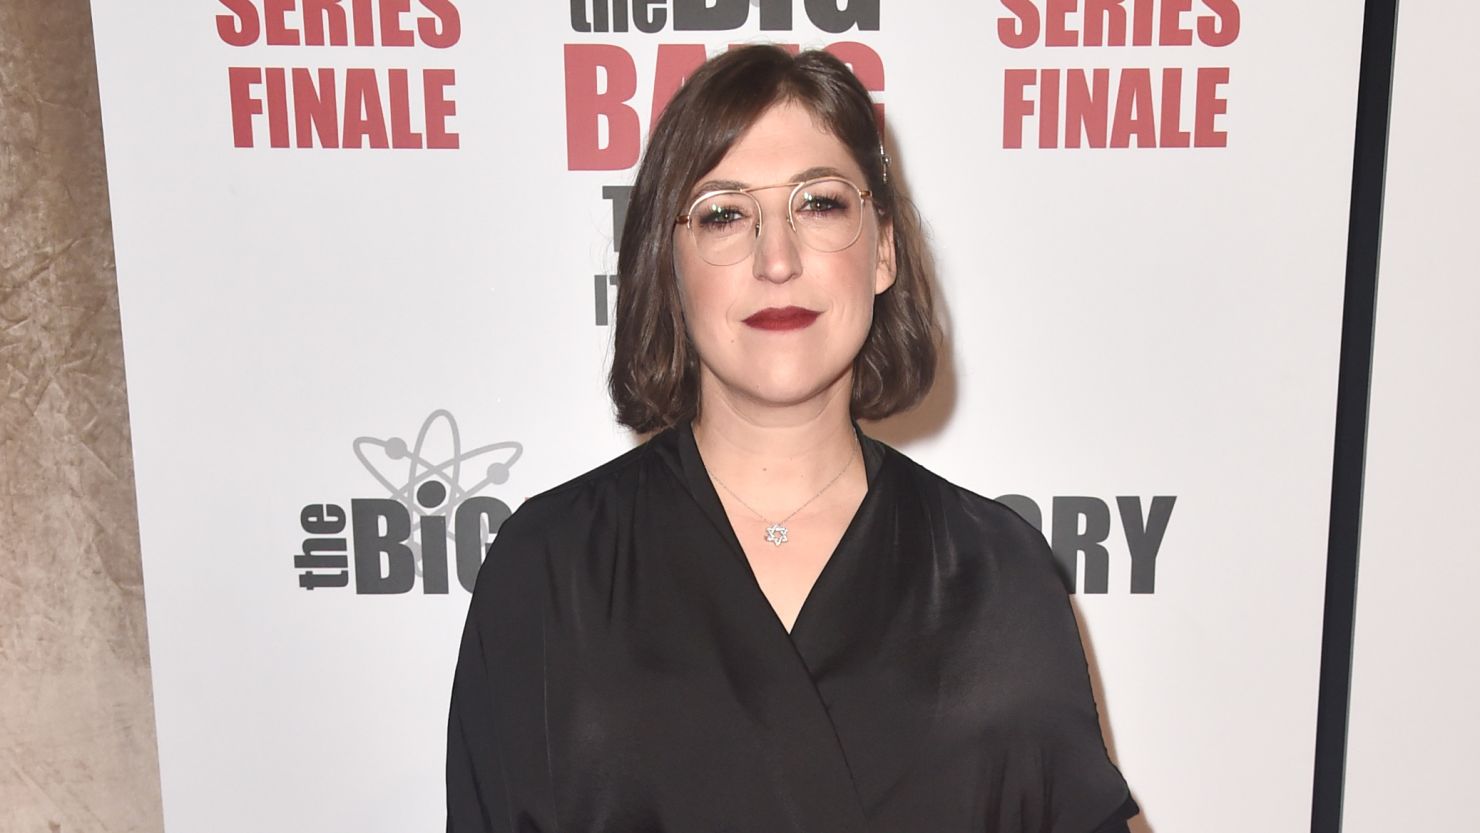 Mayim Bialik is the second woman to guest host "Jeopardy!" since Alex Trebek's death.